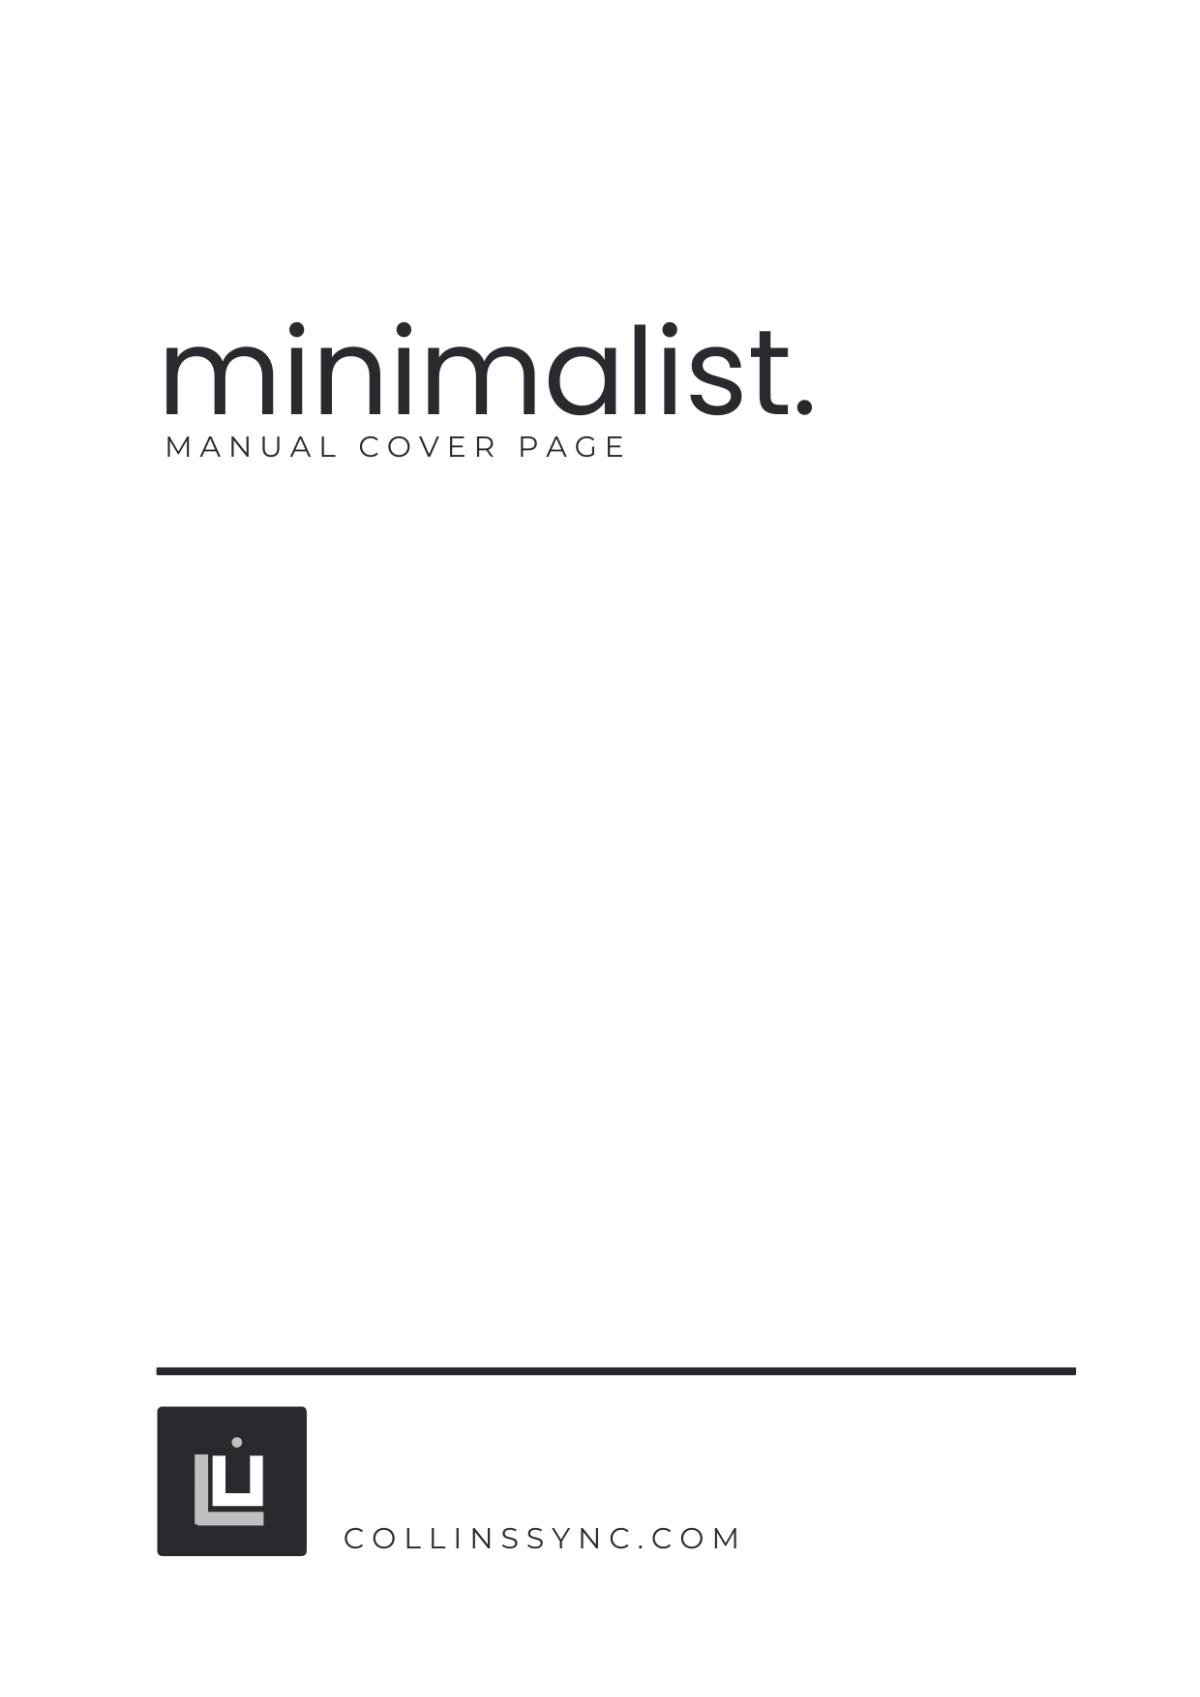 Minimalist Manual Cover Page